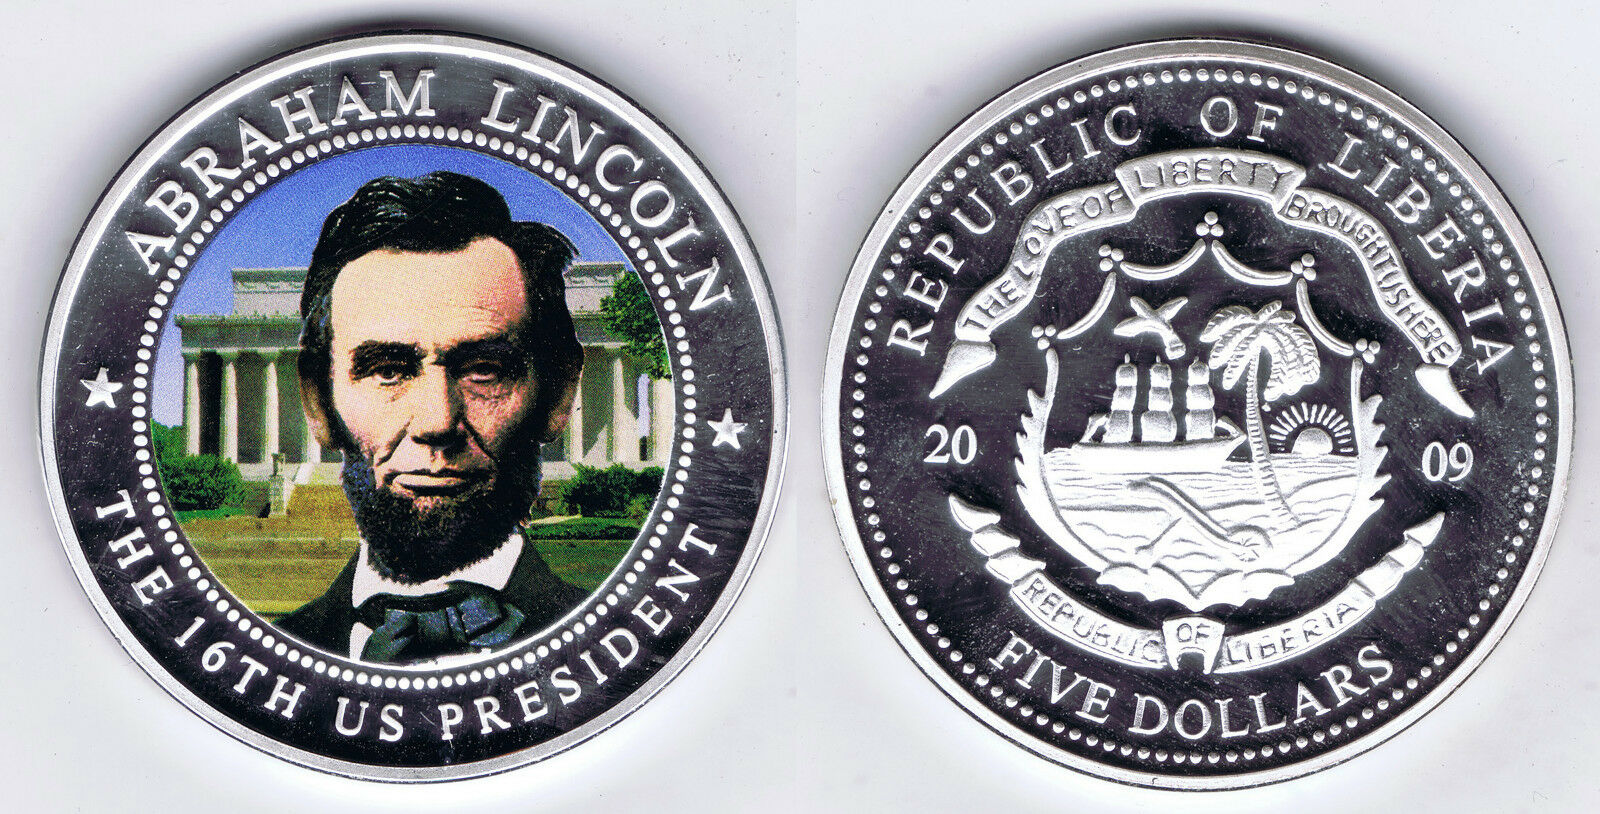 WHOLESALE - 5 COLOR SILVER PLATED COINS LIBERIA 16th PRESIDENT ABRAHAM LINCOLN